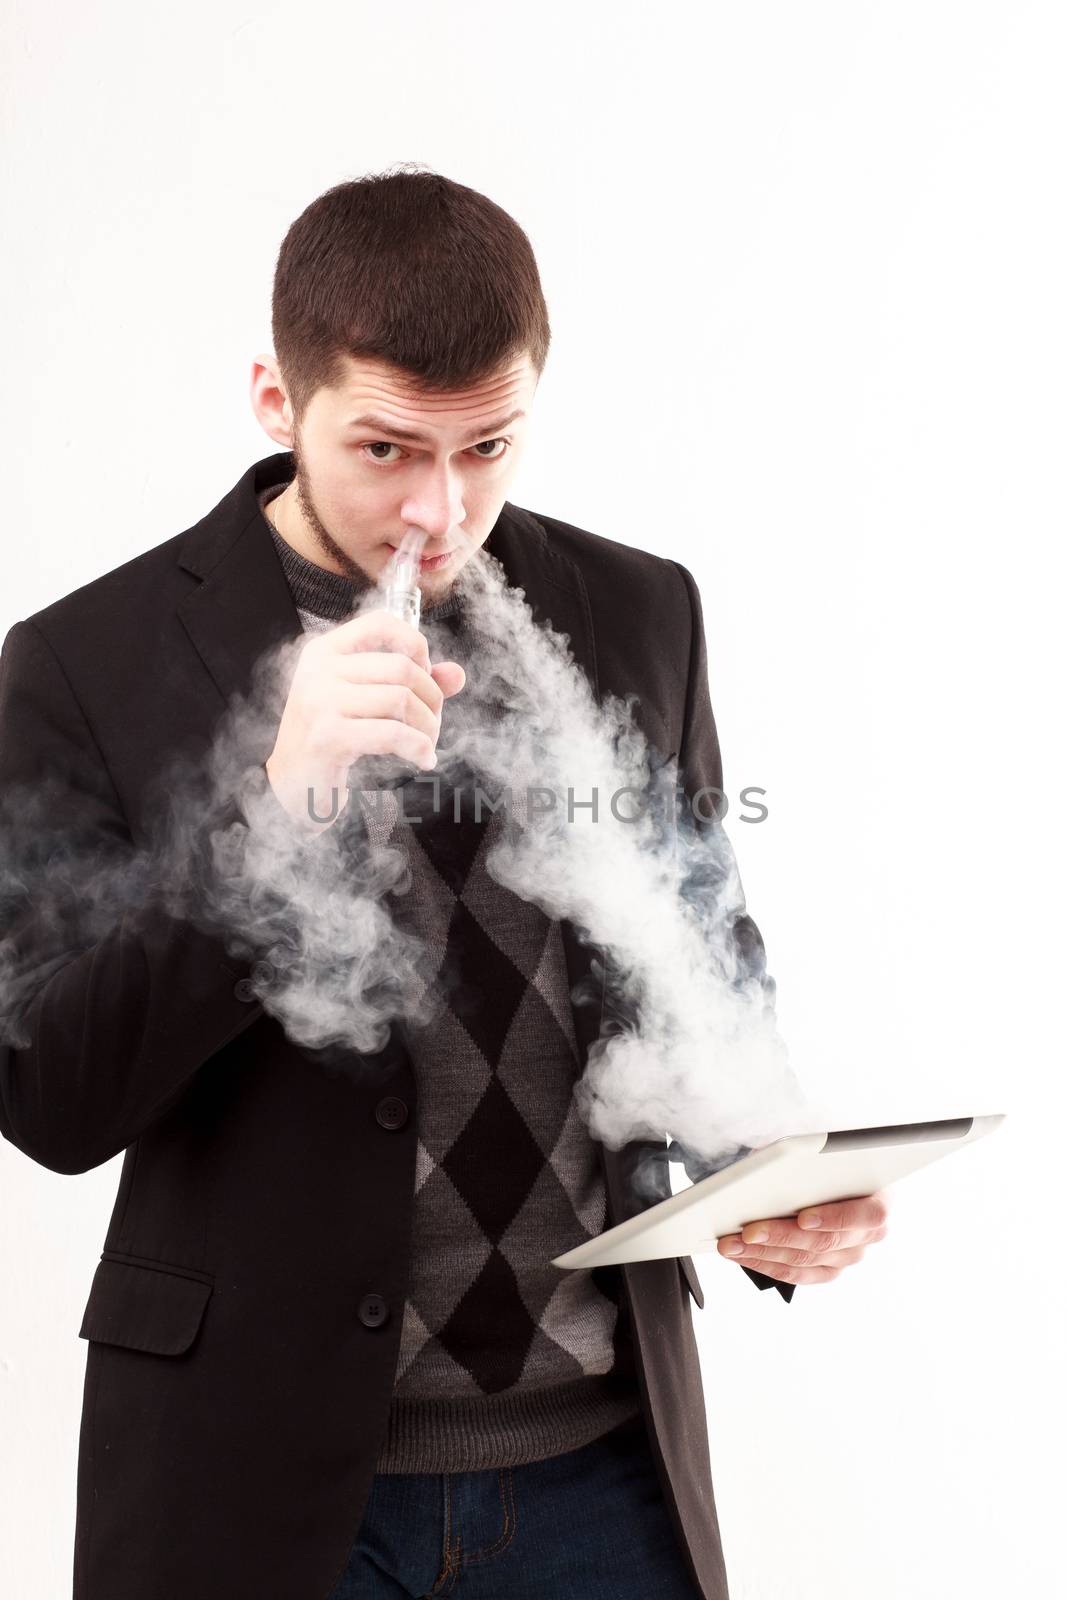 Vaping businessman with tablet by DmitryOsipov